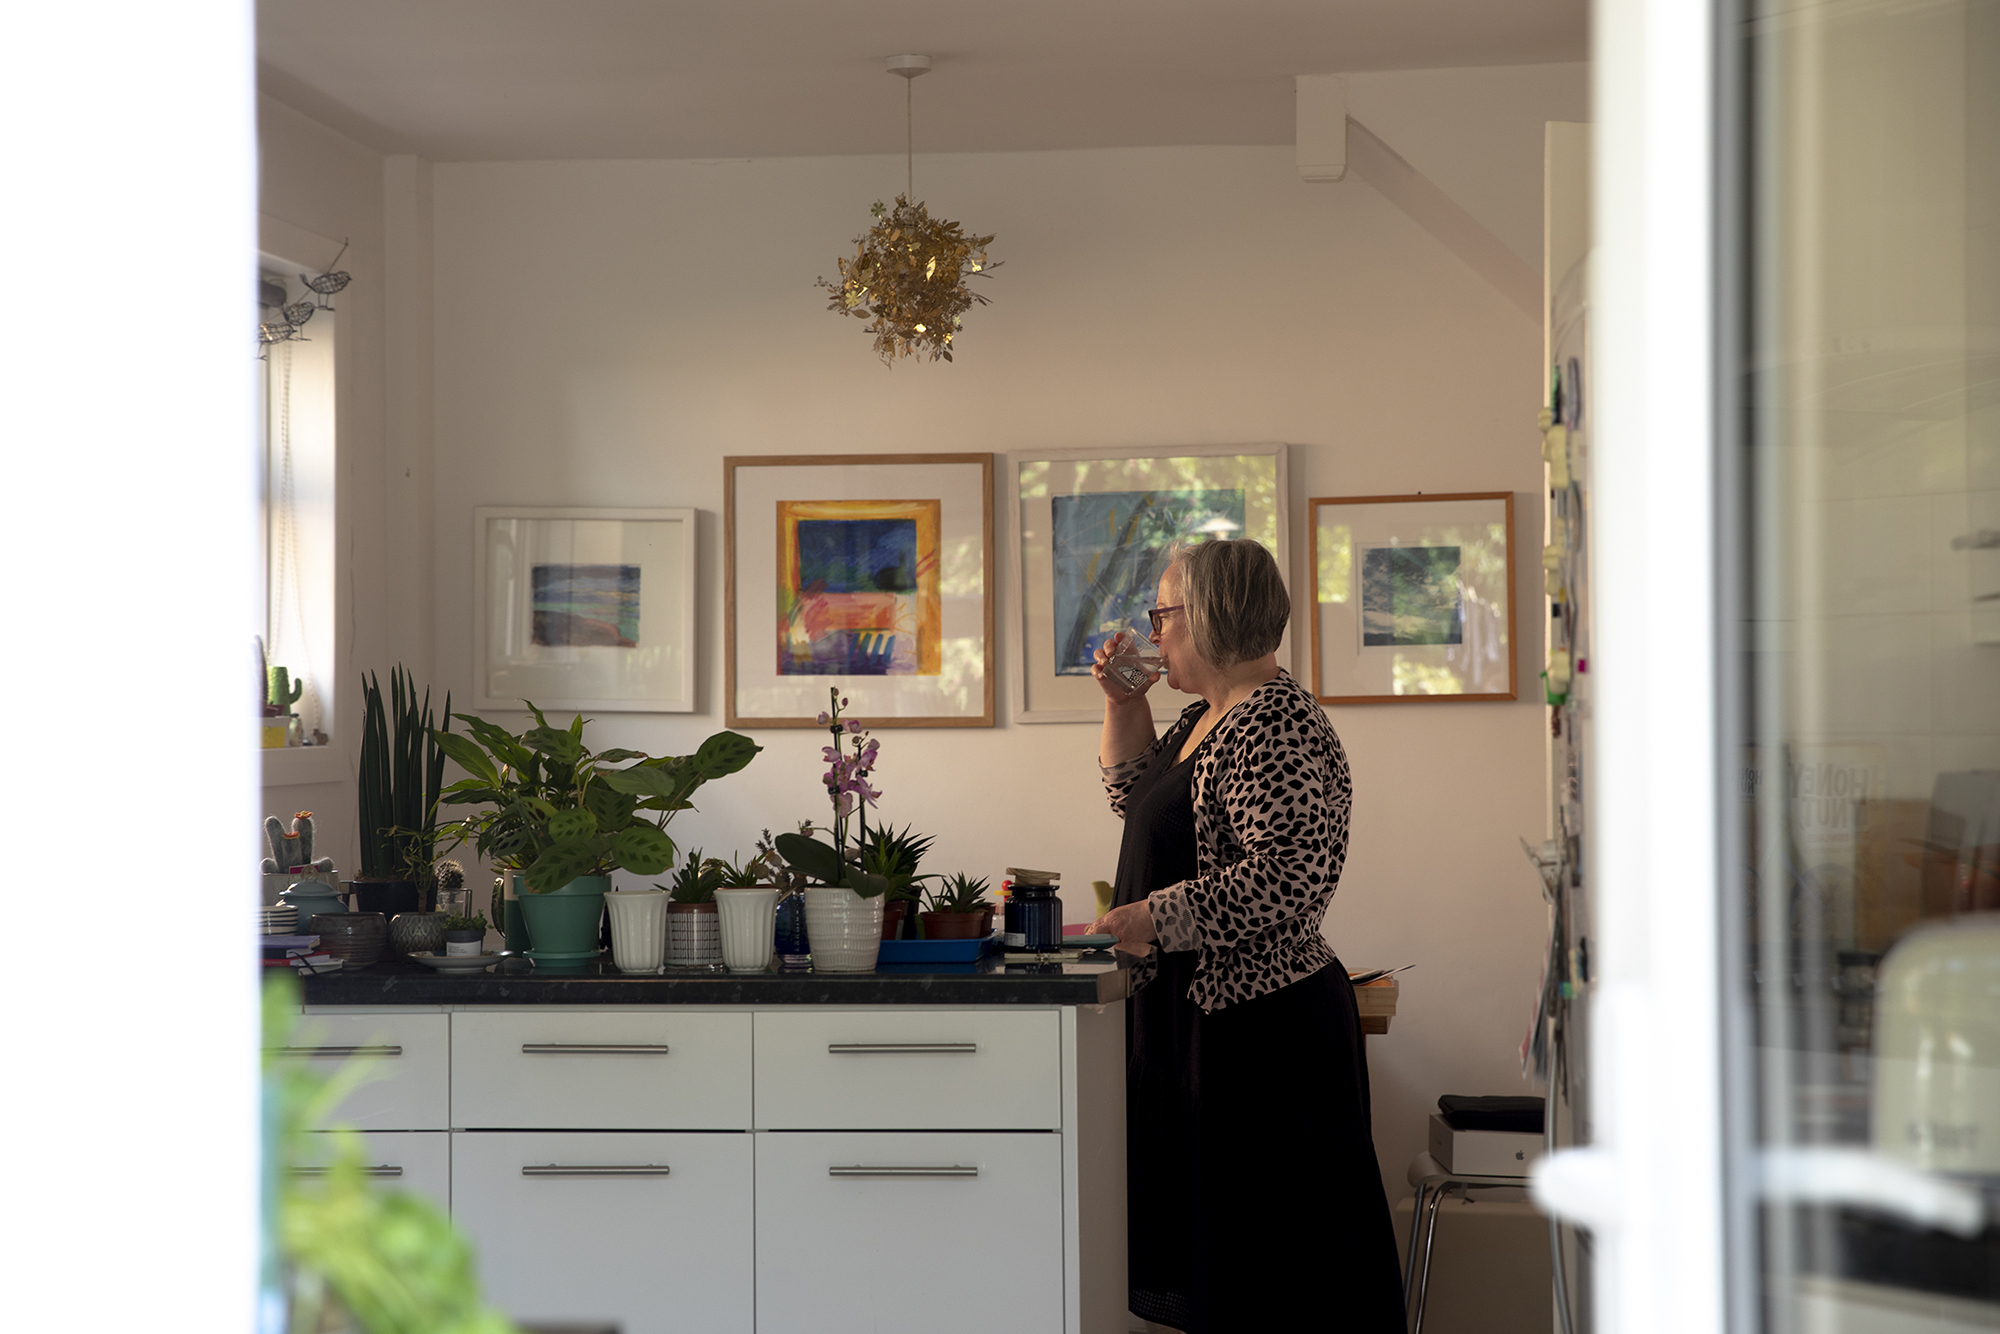 This image by BA Photography Student, Isabella Lamorna, shows her Mum inside their house, showing a soft and neutral palette.